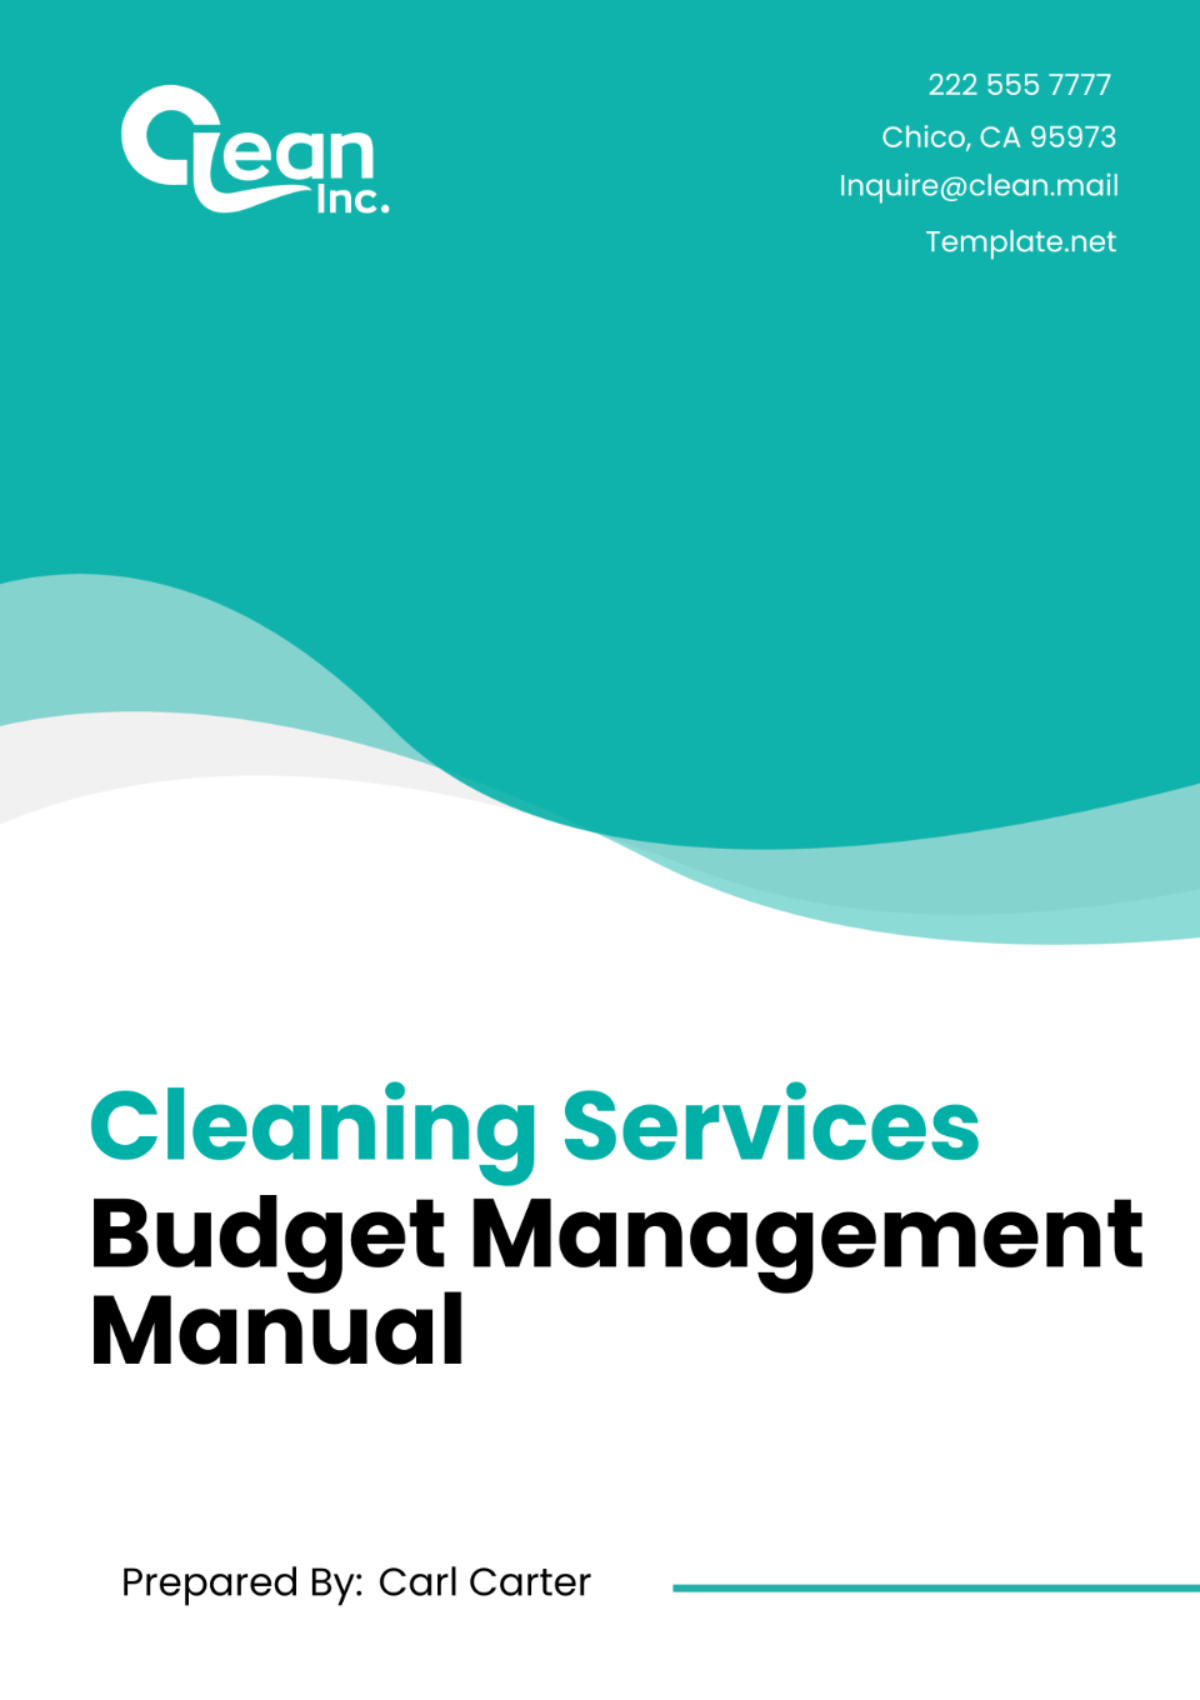 Cleaning Services Budget Management Manual Template